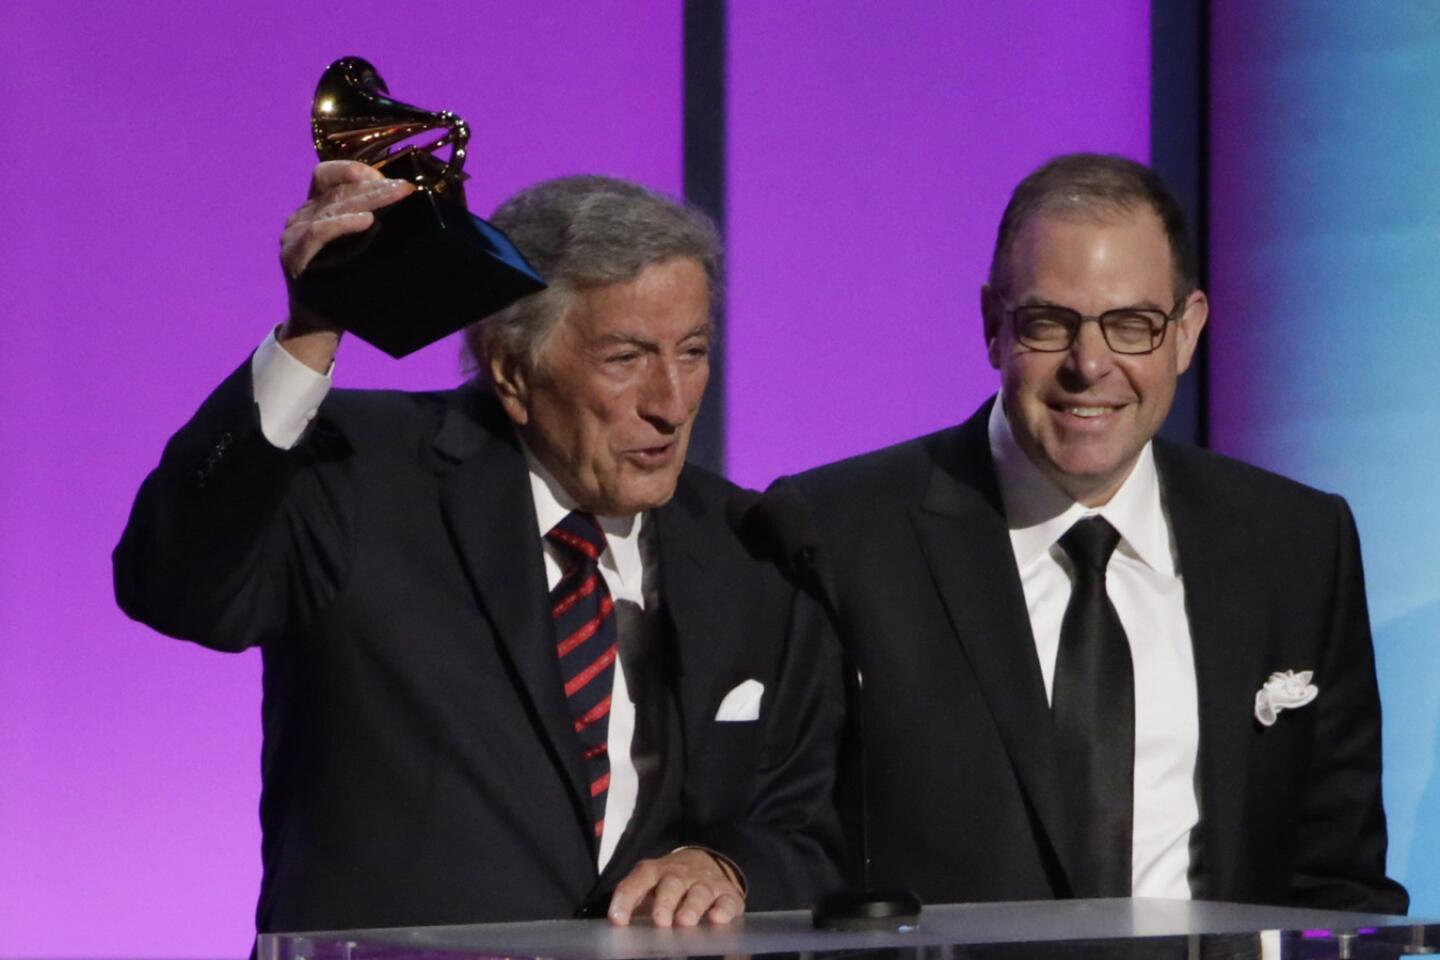 Tony Bennett and Bill Charlap accept the Grammy for traditional pop vocal album for "Tony Bennett & Bill Charlap, the Silver Lining: The Songs of Jerome Kern."